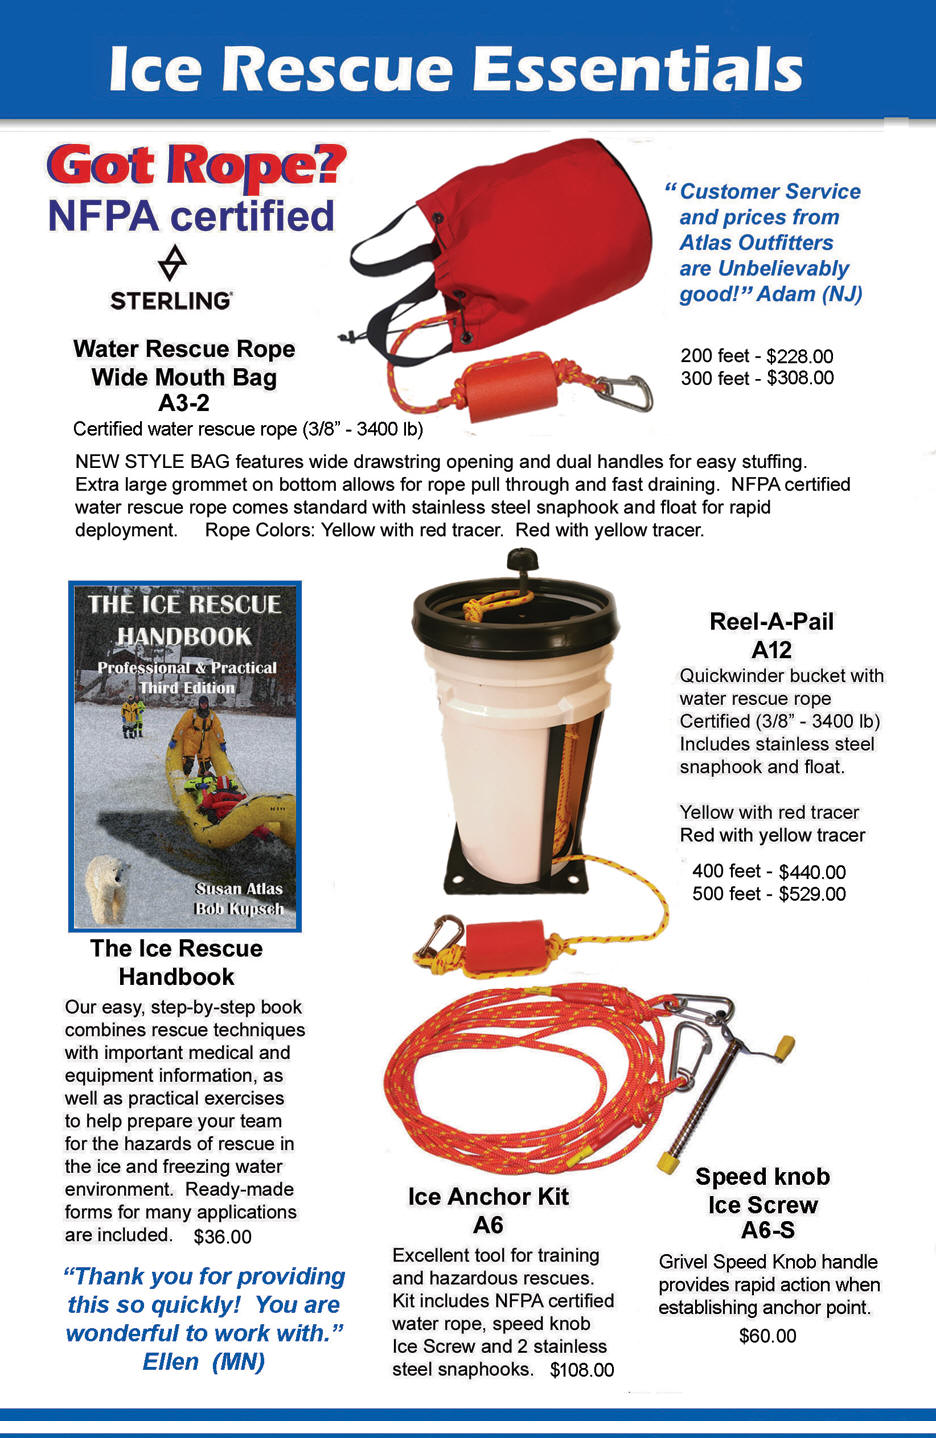 Water rescue rope from Sterling ice anchor kits